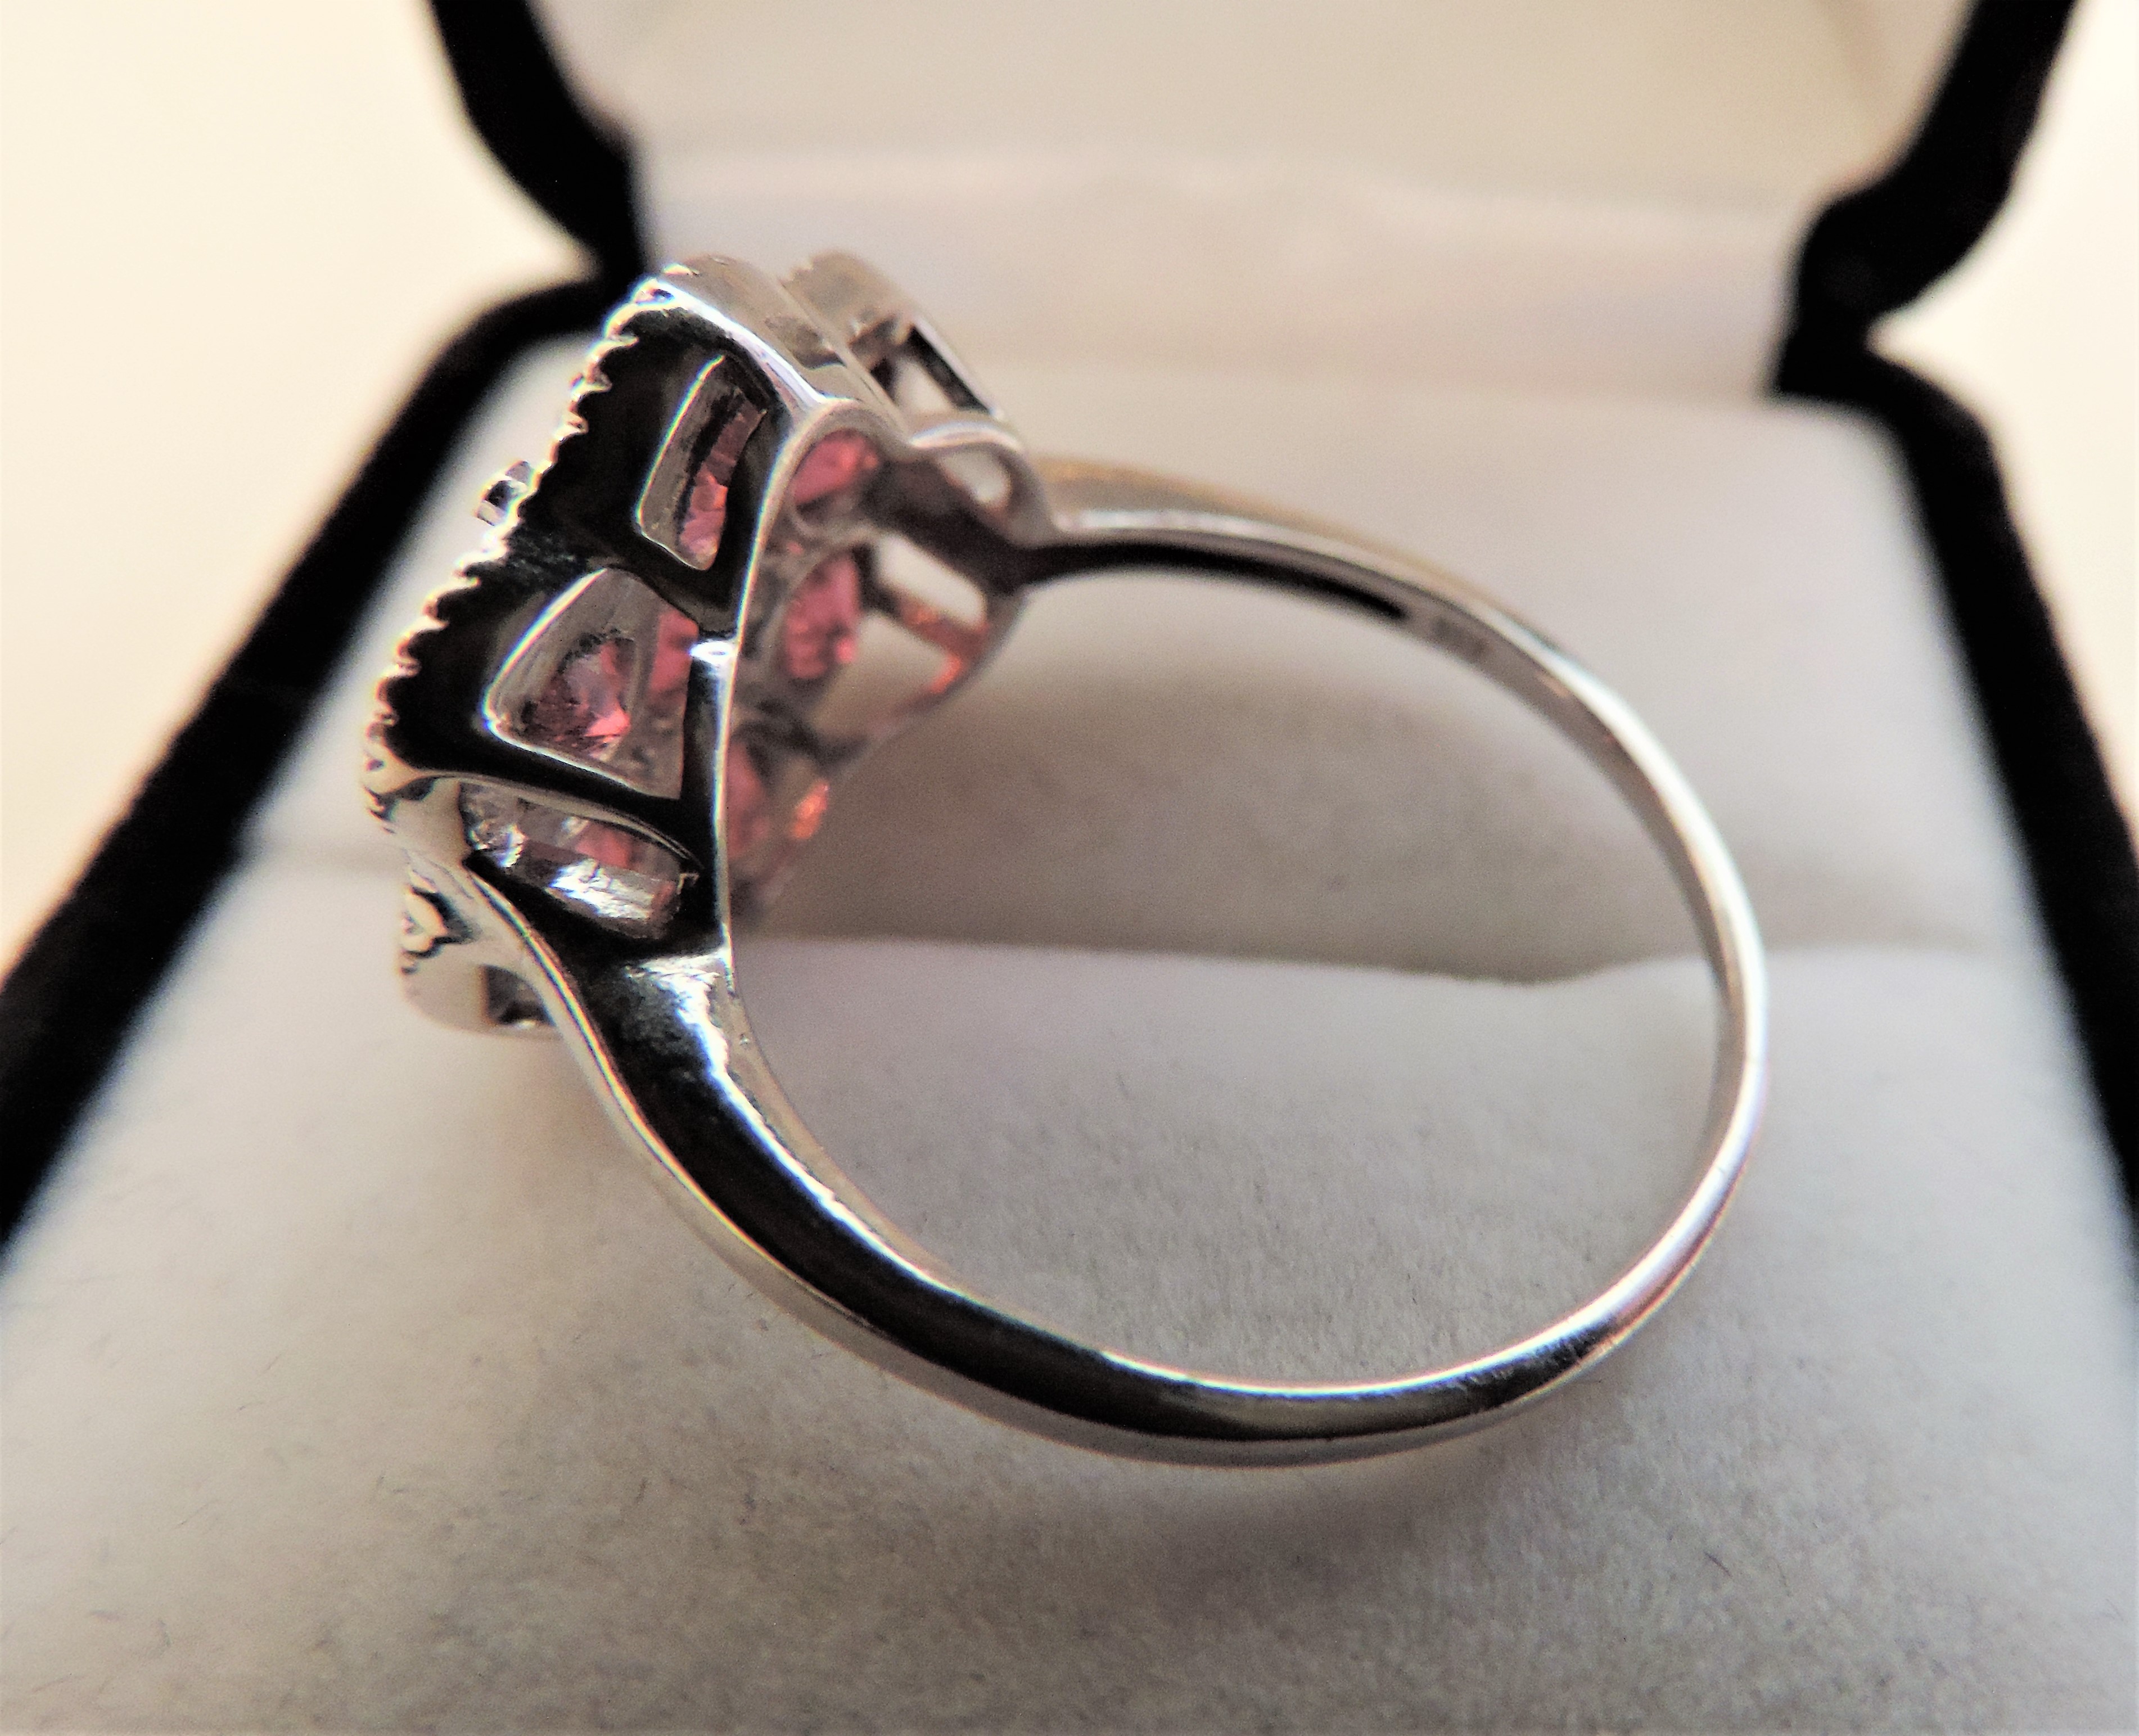 4.55 Carat Pink Sapphire Cluster Ring in Sterling Silver - Image 5 of 5